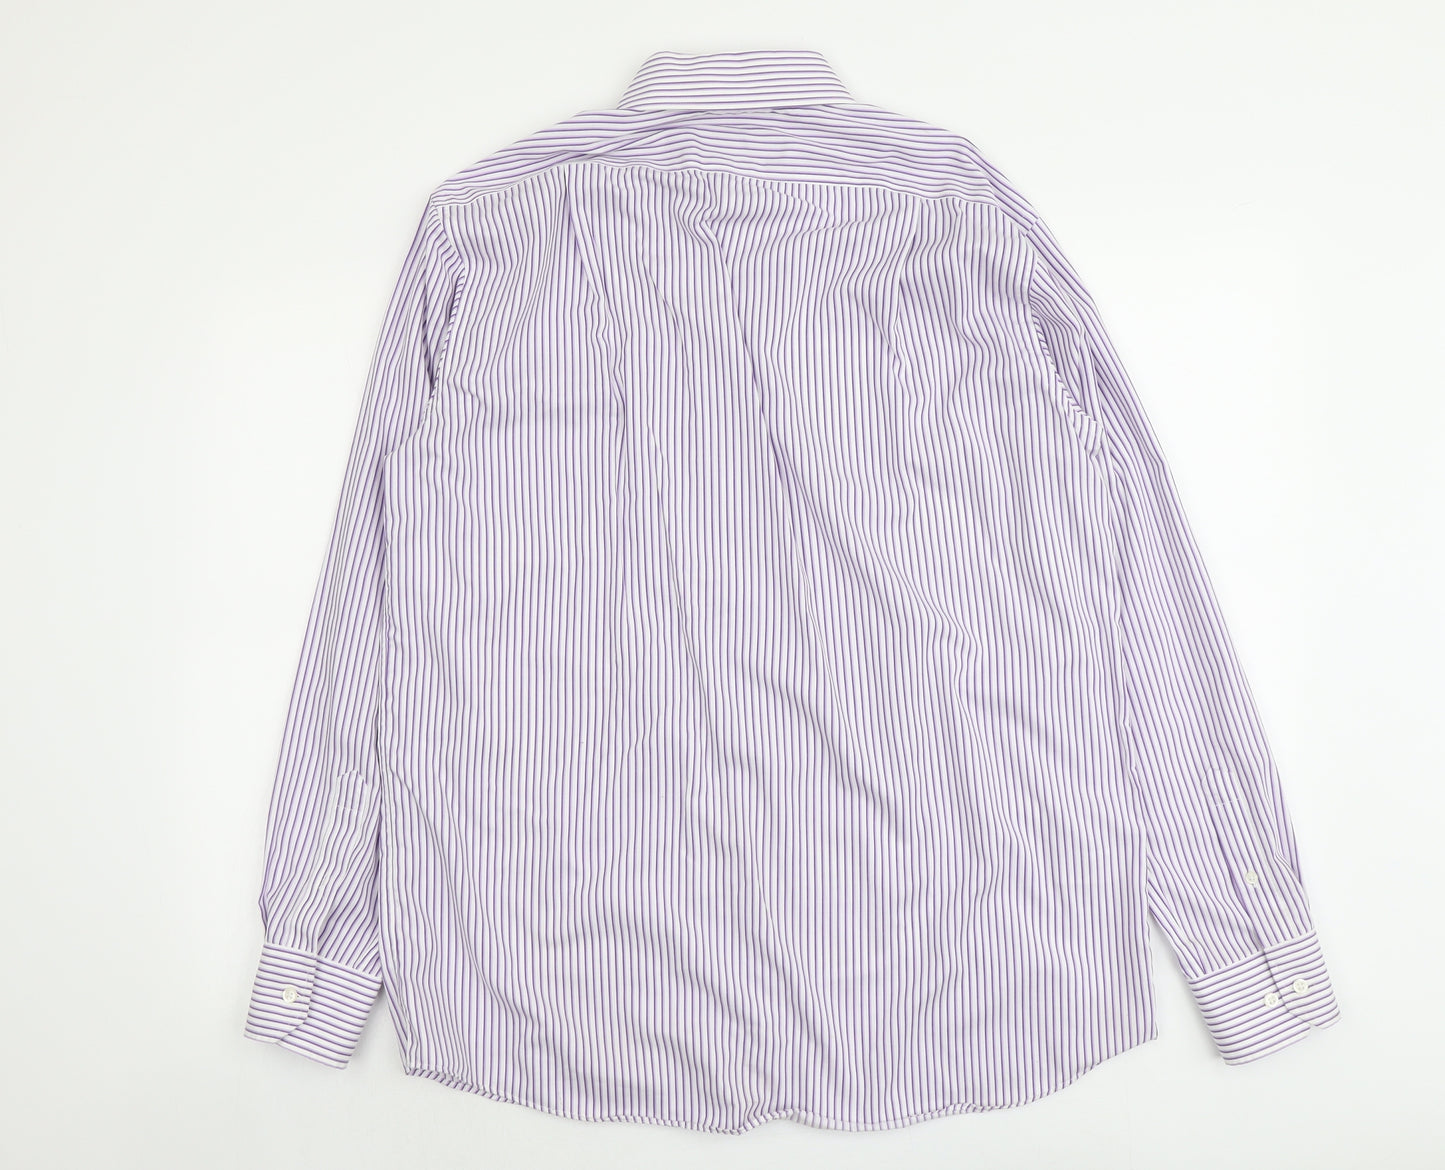 Marks and Spencer Mens Purple Striped Cotton Button-Up Size 16 Collared Button